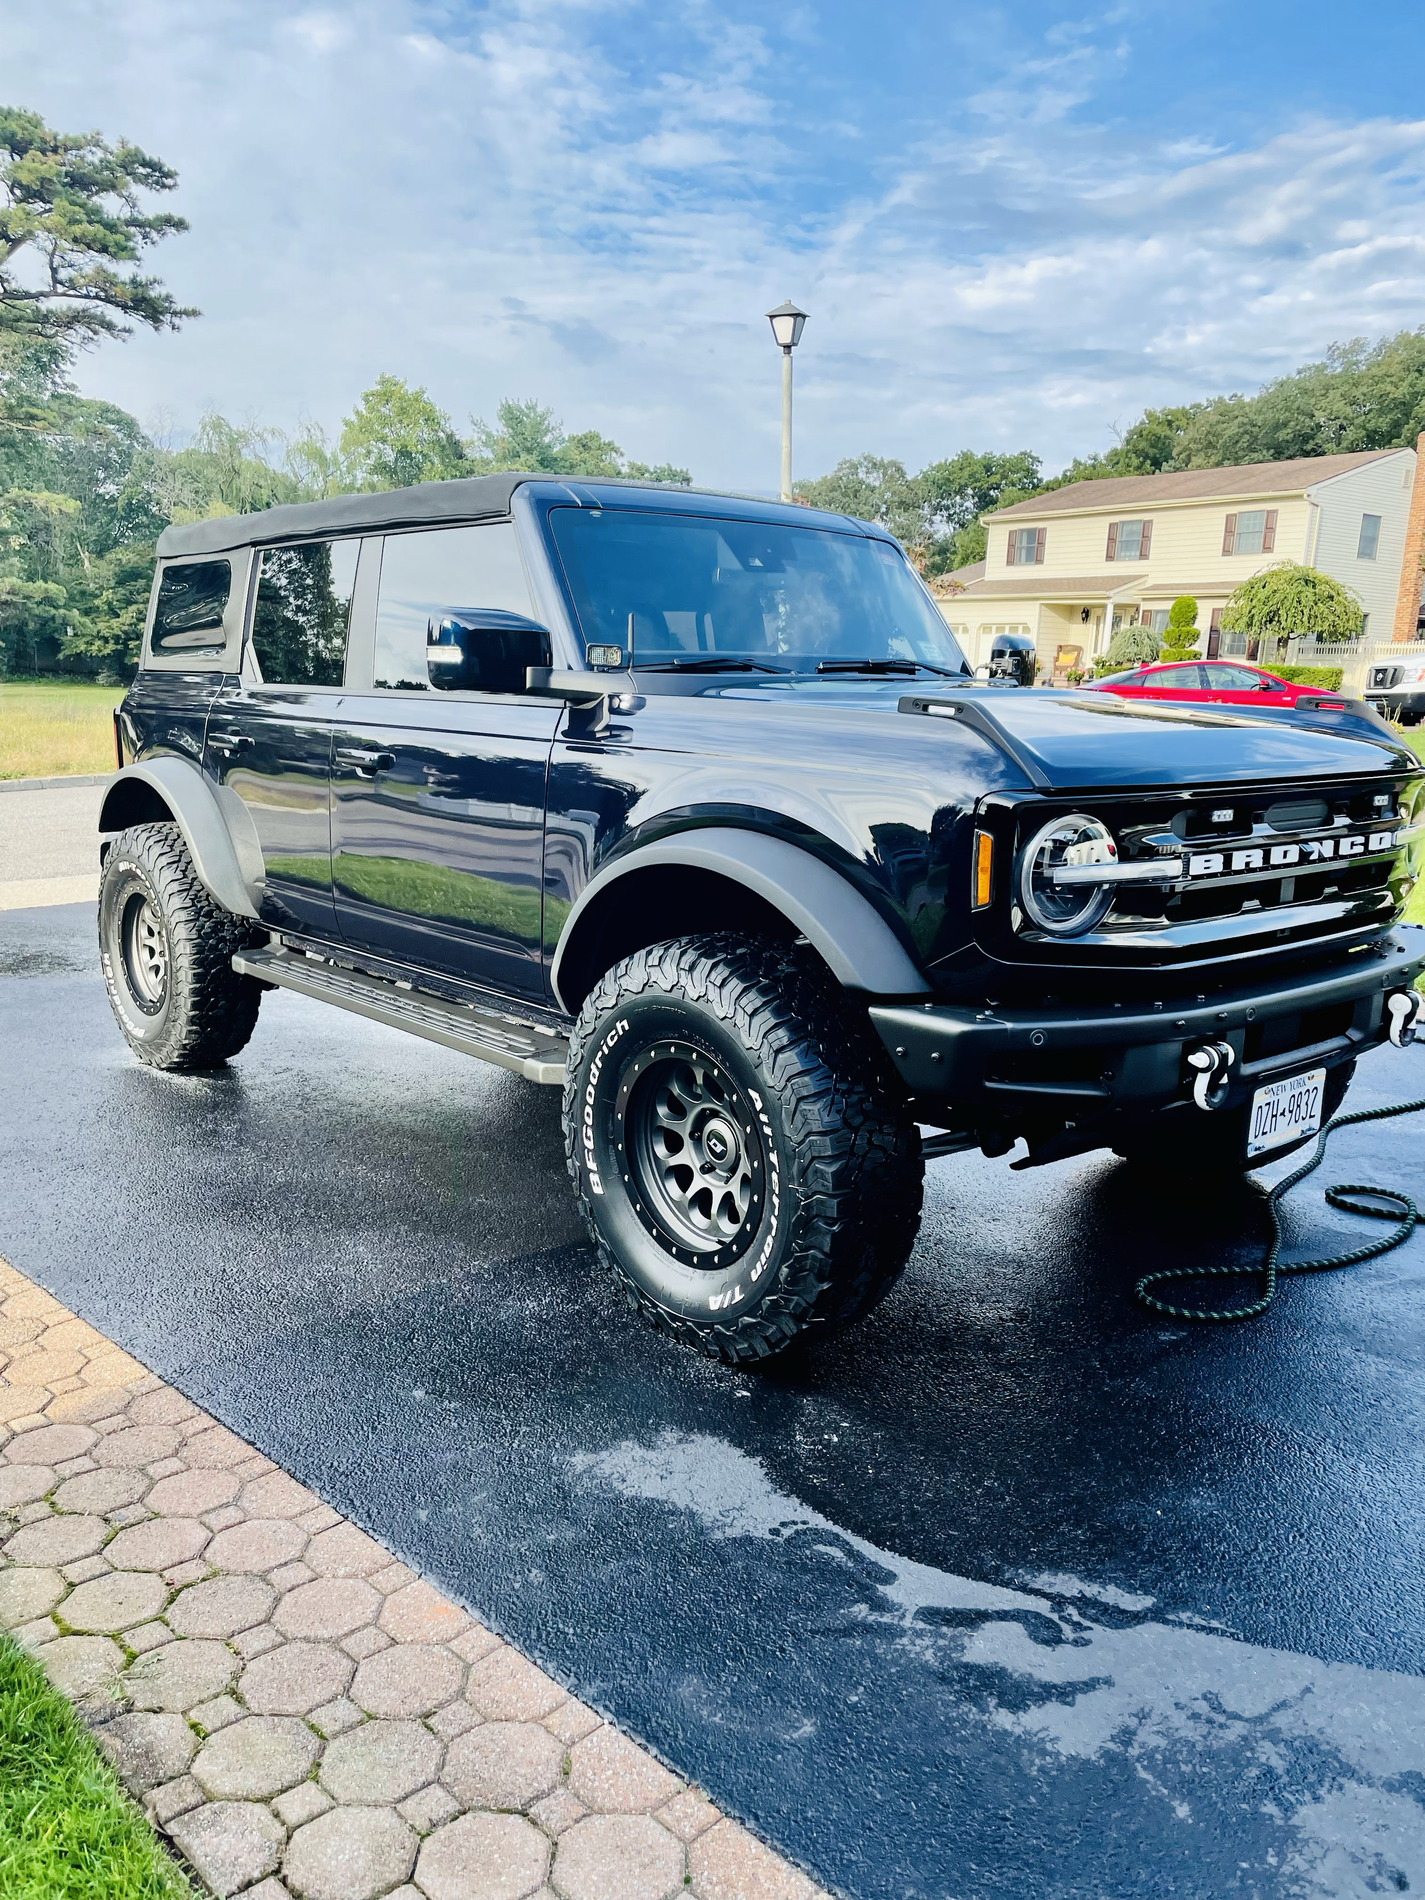 Ford Bronco AMB OBX SAS on 1" Zone Level Kit, 35" K02 Tires, SCS Ray 10 Wheels tempImageWEBsPX